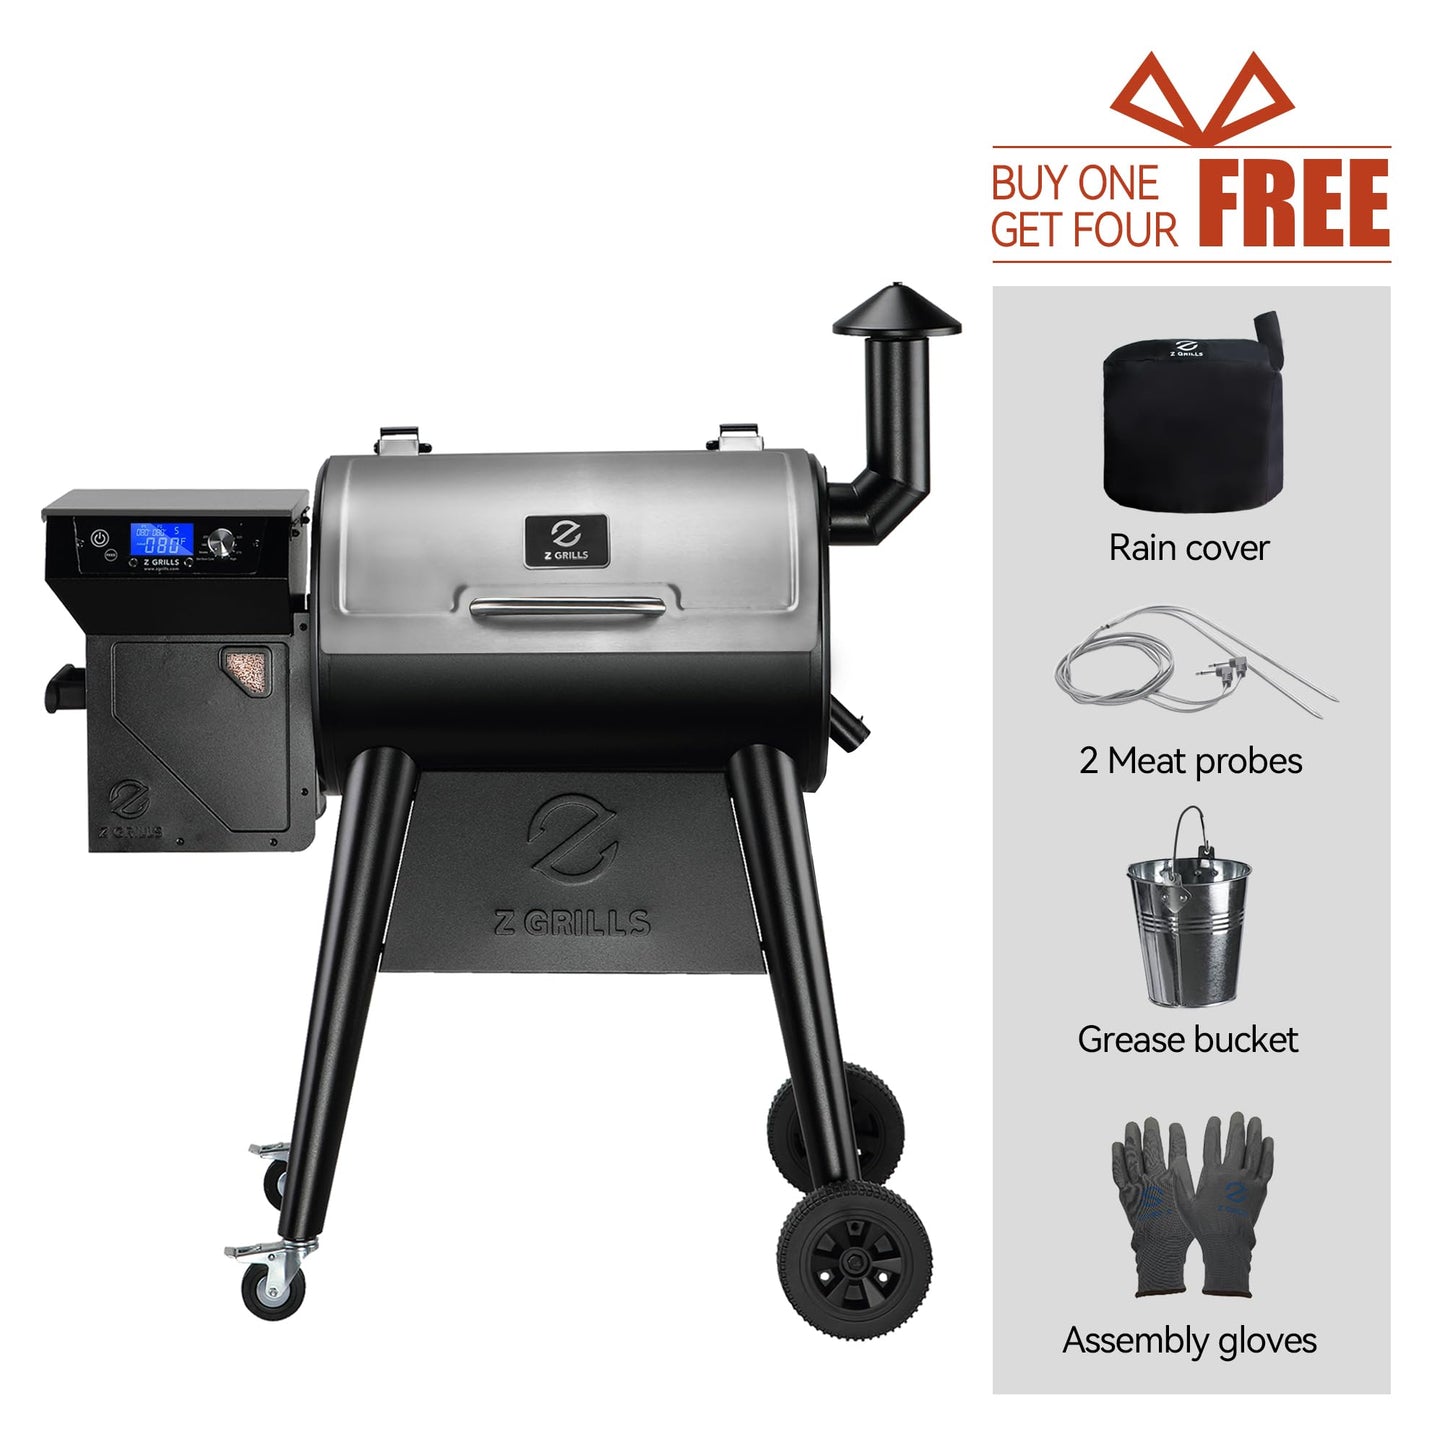 Z GRILLS Newest Pellet Grill Smoker with PID 2.0 Controller, Meat Probes, Rain Cover for Outdoor BBQ, 450E